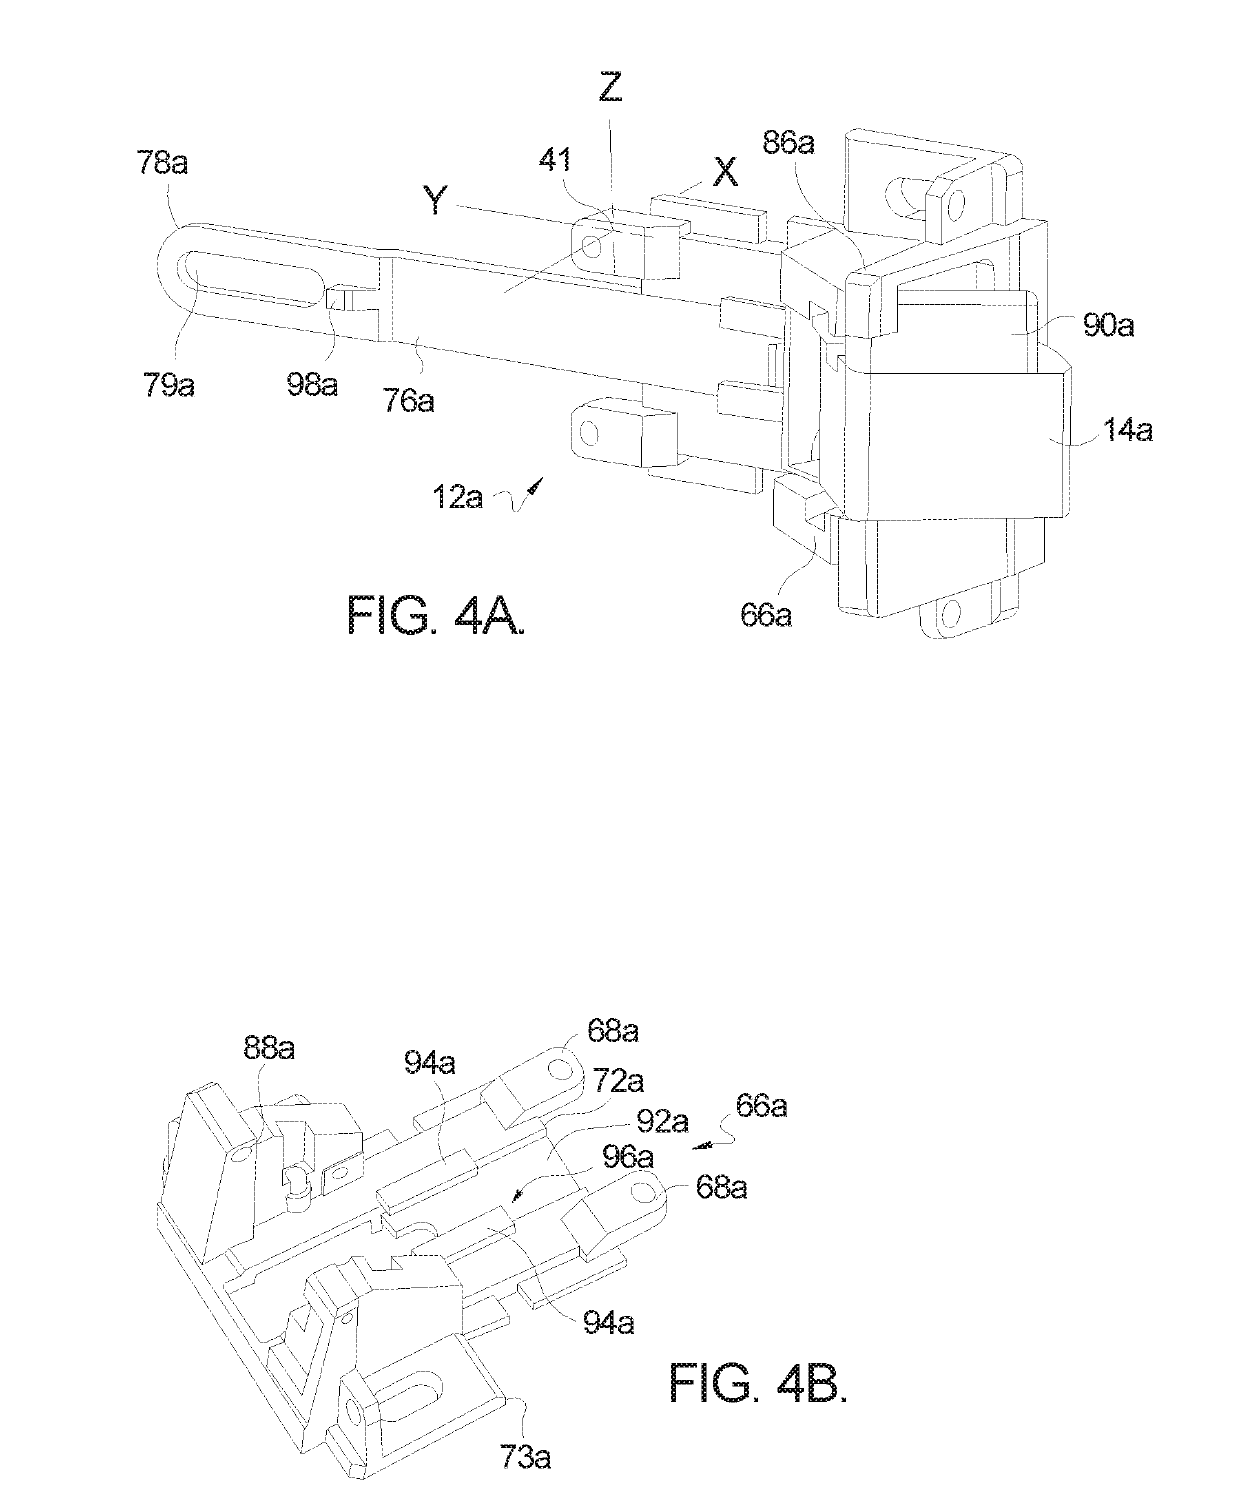 Interchangeable Latch Assembly for an Exit Device